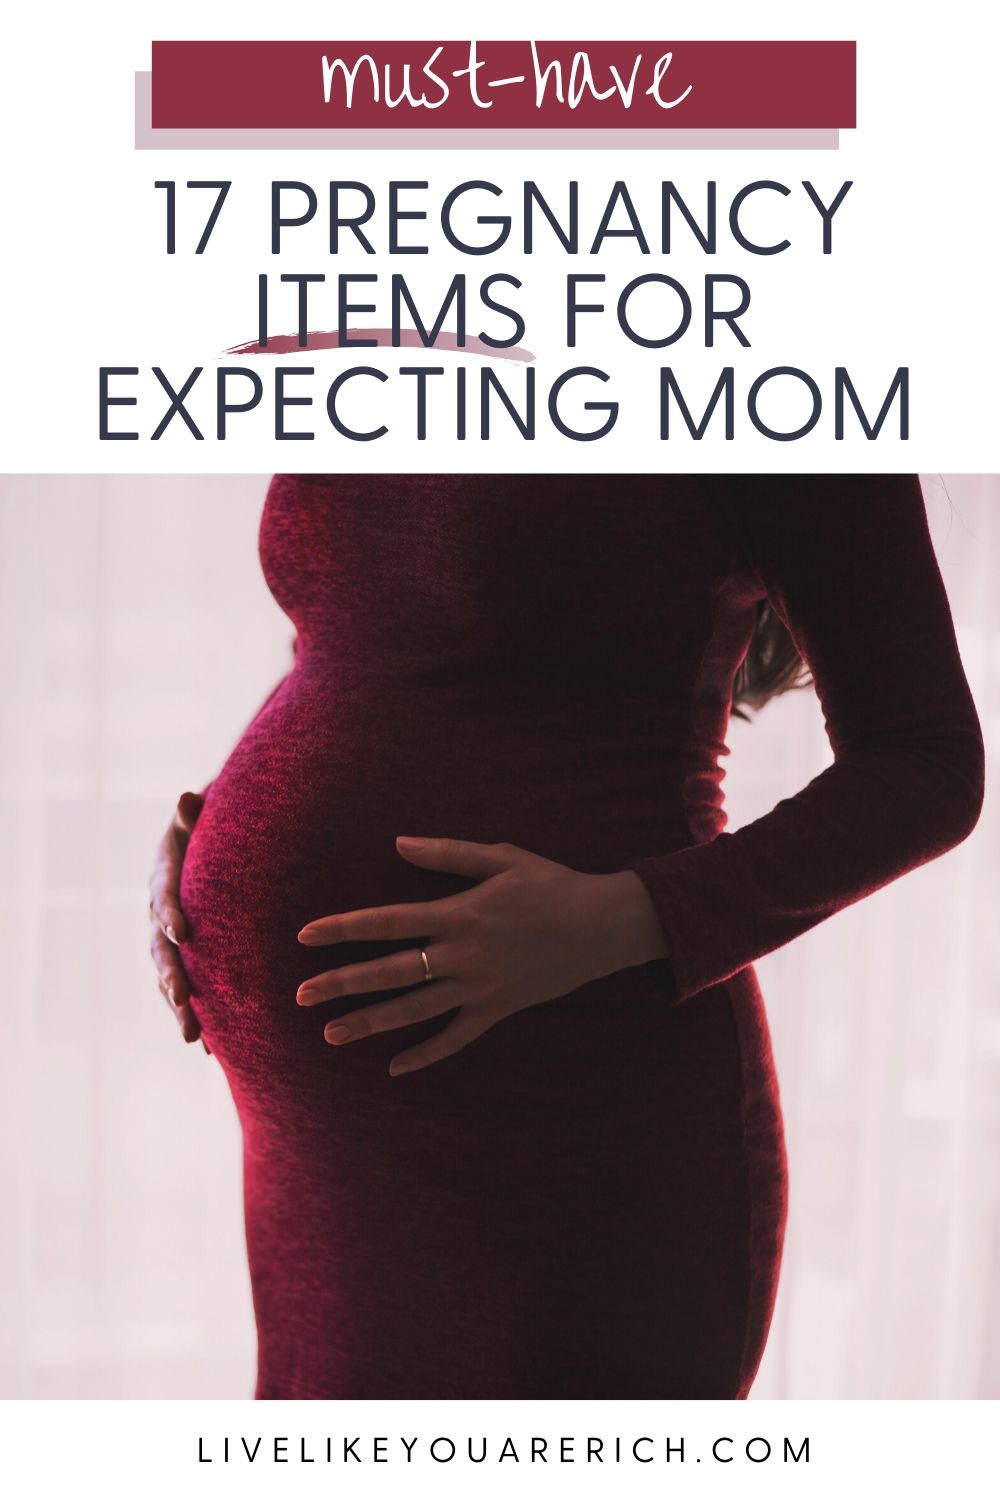 Let’s face it – being pregnant is tough! I like to make it as comfortable as possible and I want to share what worked in my last pregnancy and what I’ve found helpful in this pregnancy with you too. This is a GREAT list. Some of these must-have items are very unique...you may have never heard of them (especially 2, 7, & 13). 